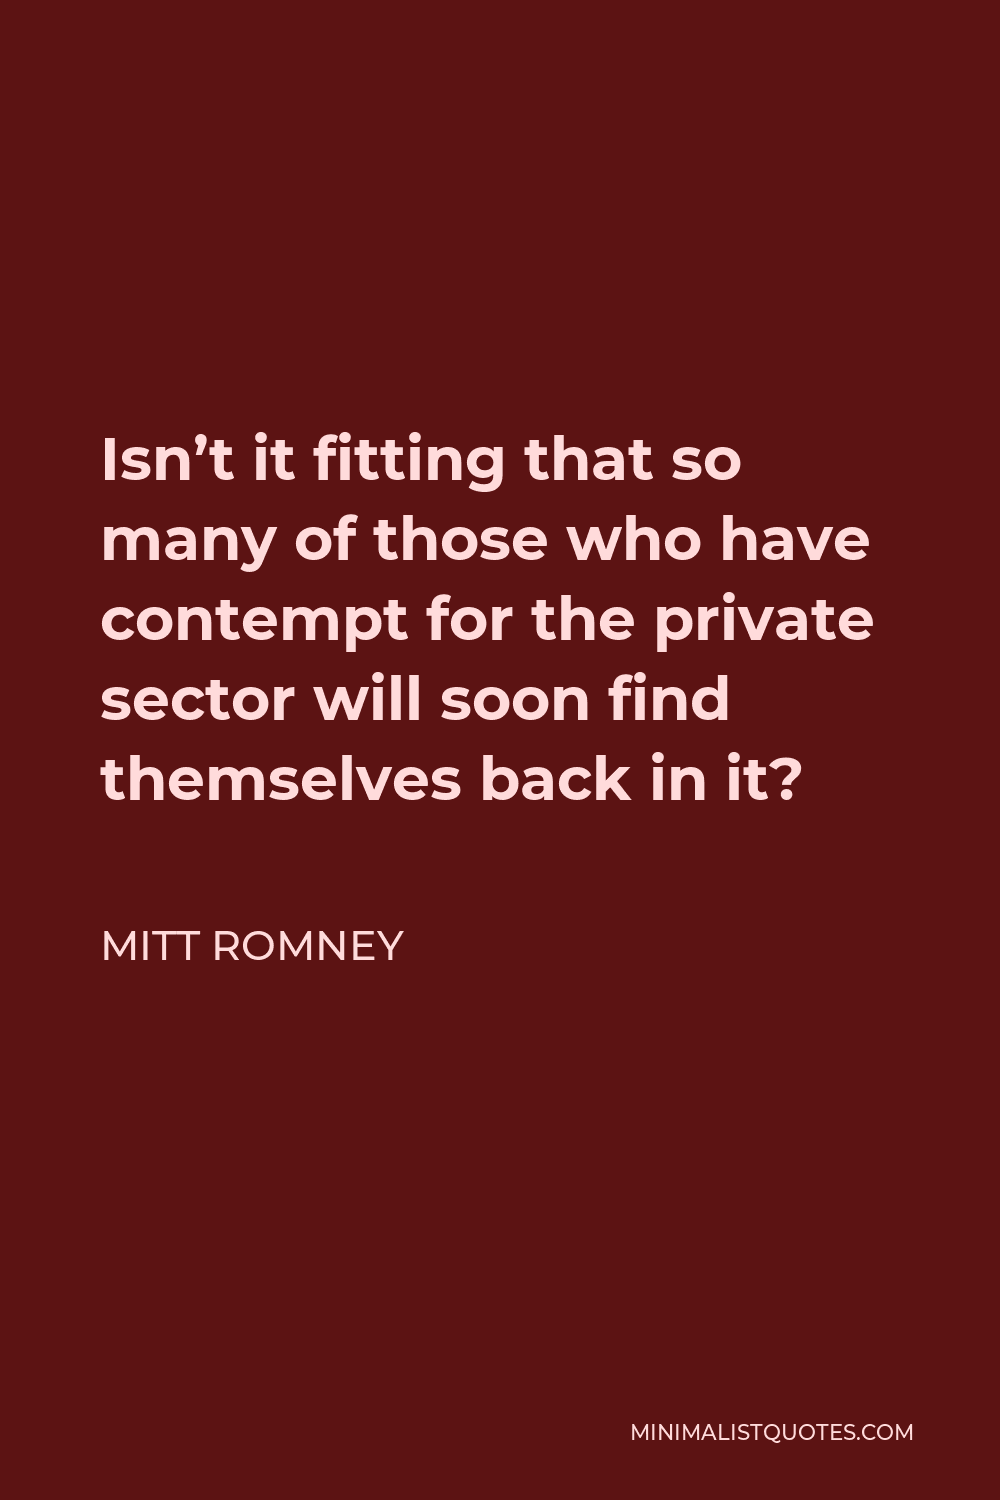 Mitt Romney Quote - Isn’t it fitting that so many of those who have contempt for the private sector will soon find themselves back in it?